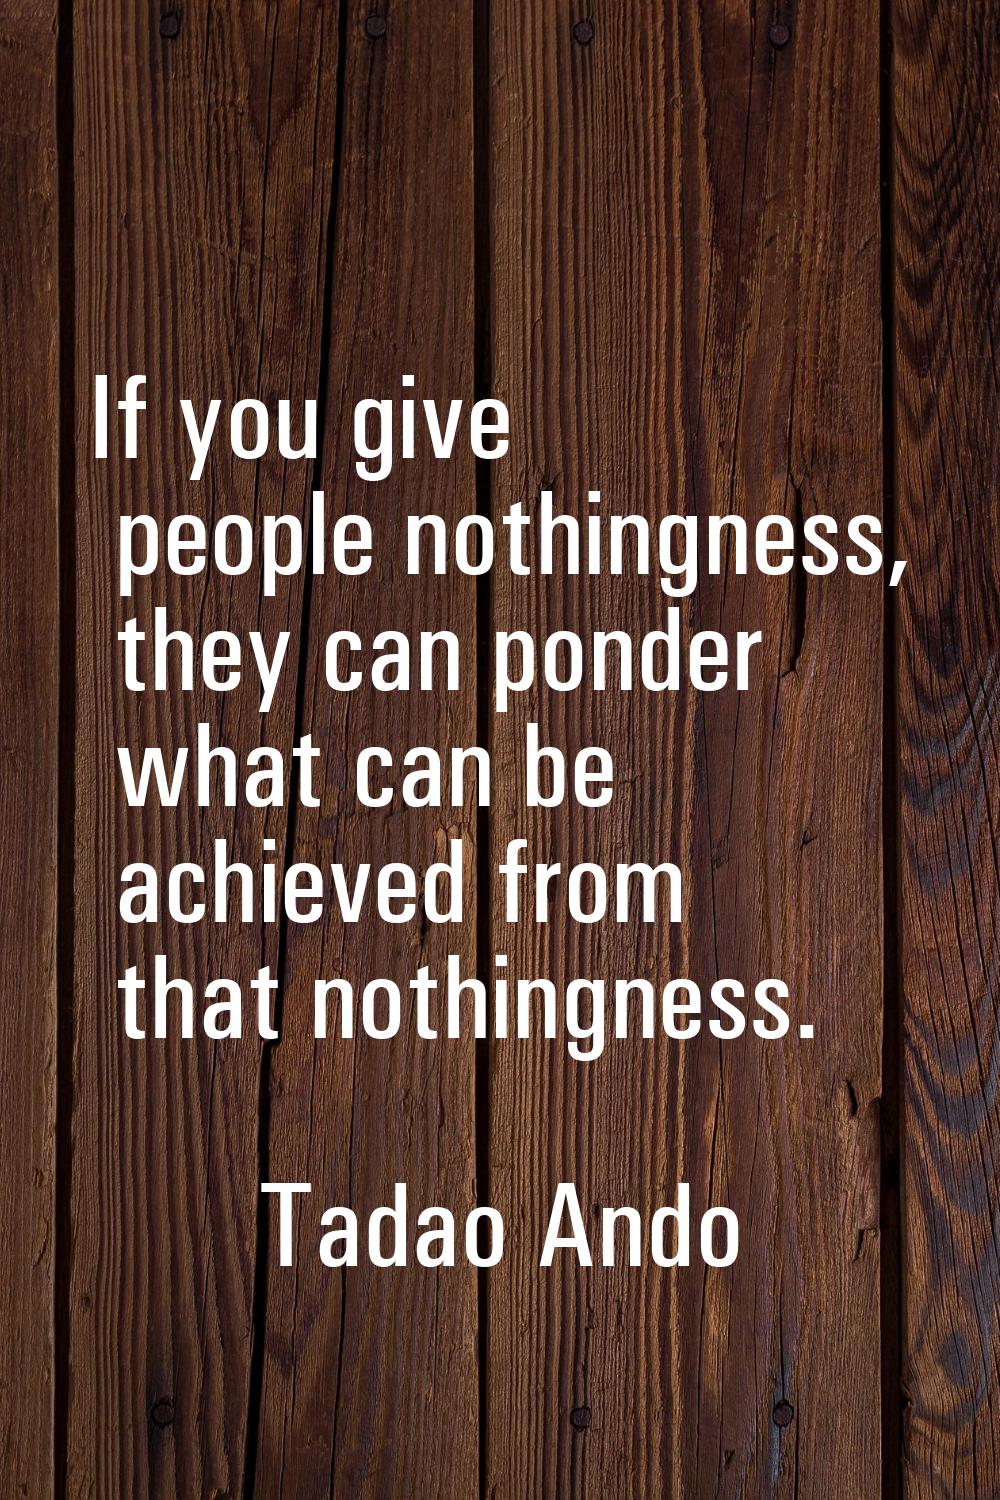 If you give people nothingness, they can ponder what can be achieved from that nothingness.